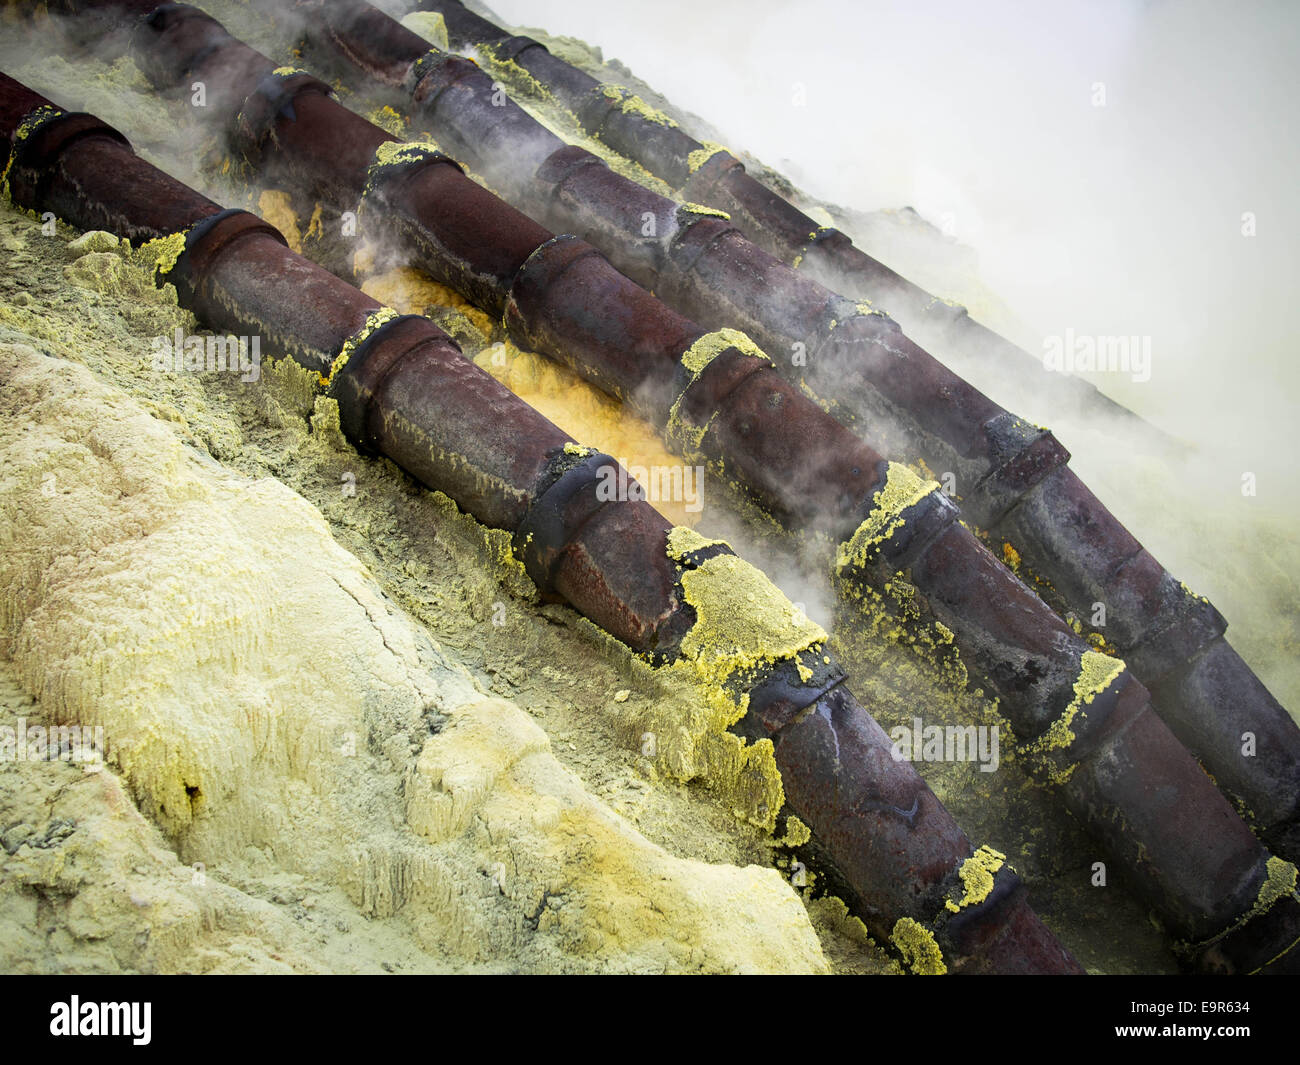 Ceramic pipes used for sulfur mining inside the crater of Kawah Ijen volcano in East Java, Indonesia. Stock Photo